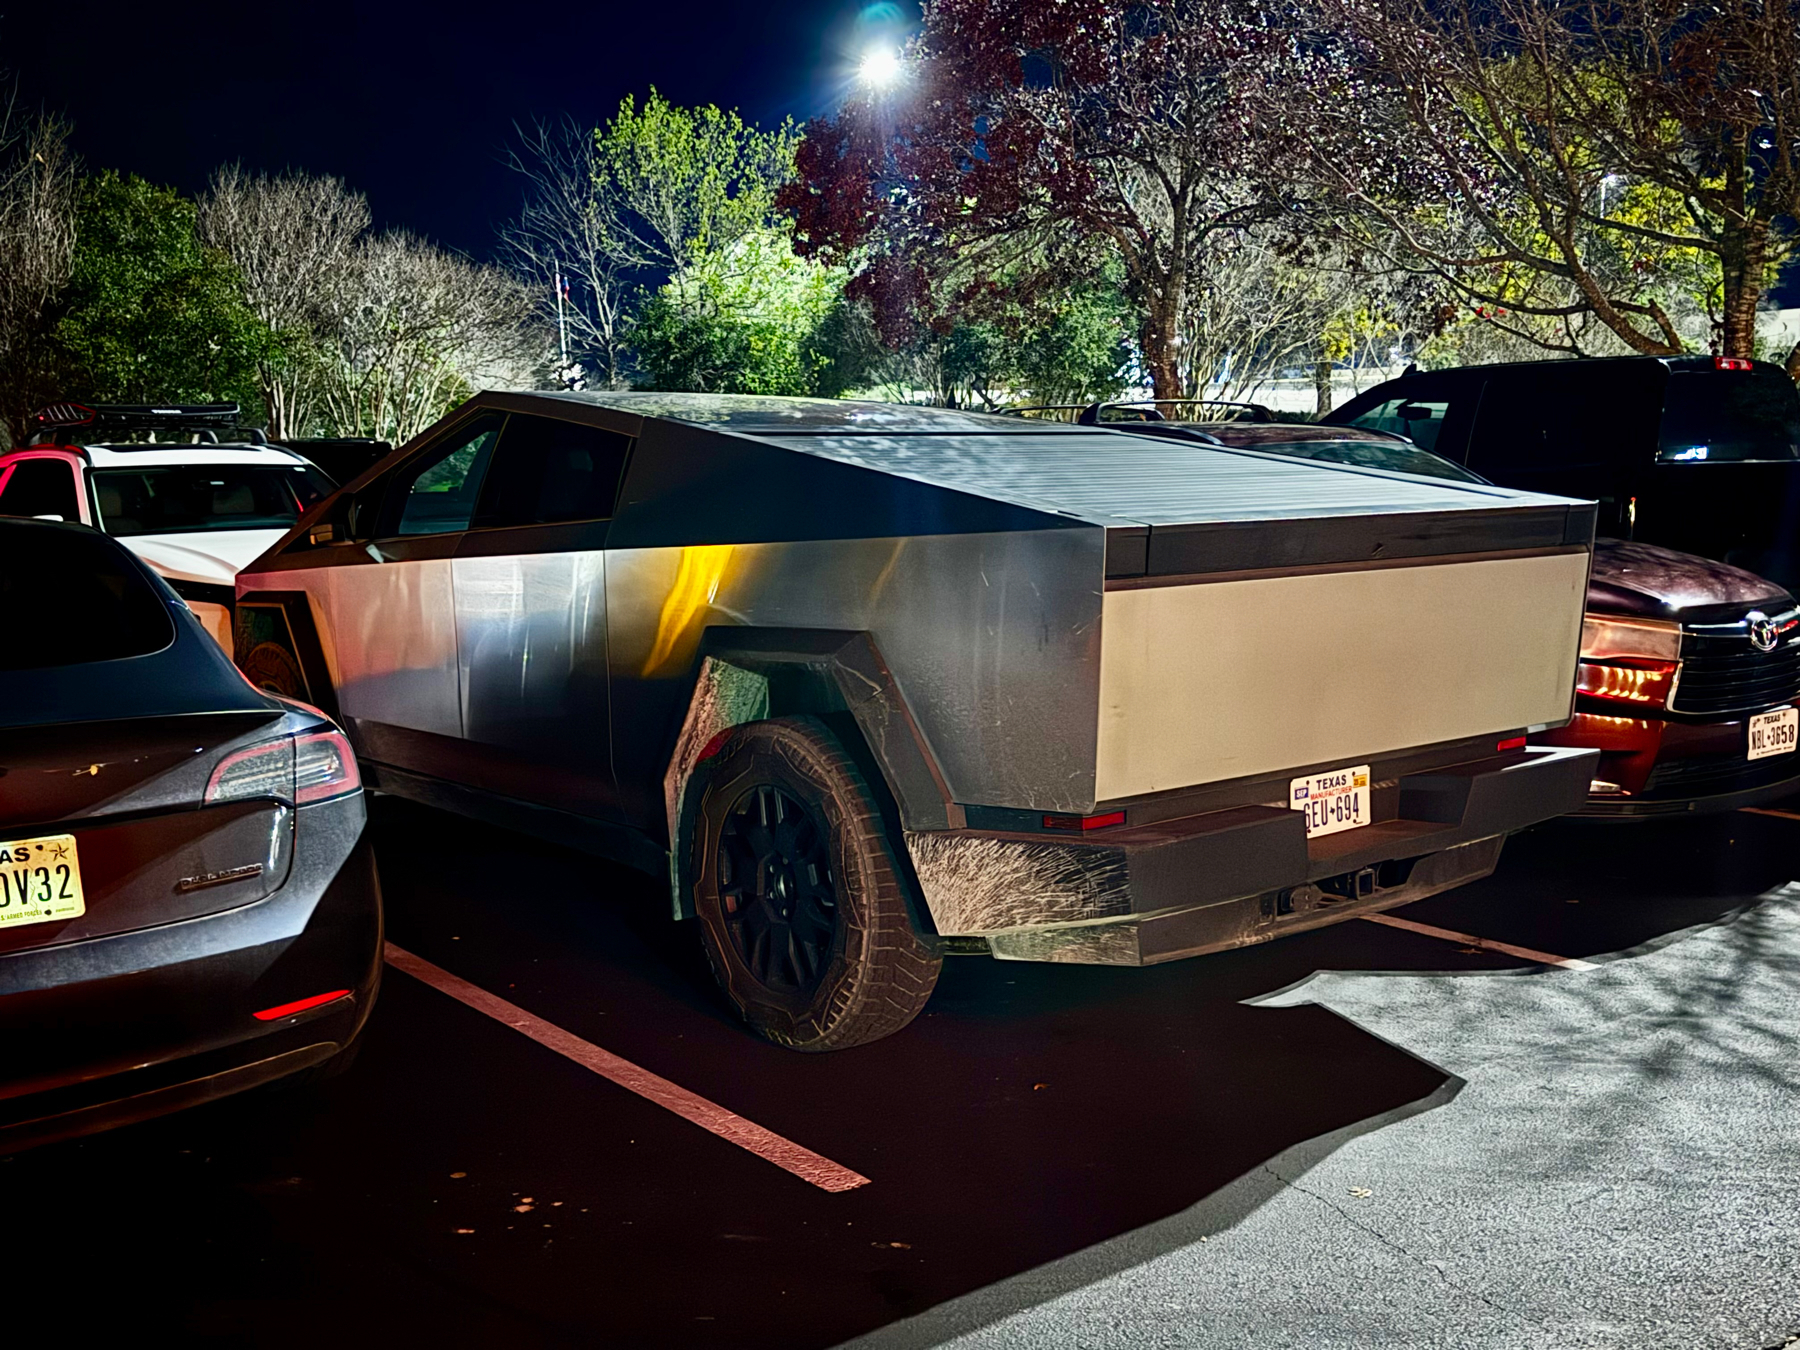 A Tesla Cybertruck parked in a parking lot at night, surrounded by other vehicles. The Cybertruck&rsquo;s distinct angular design and metallic finish are visible. The photo is taken from a three-quarter rear perspective.